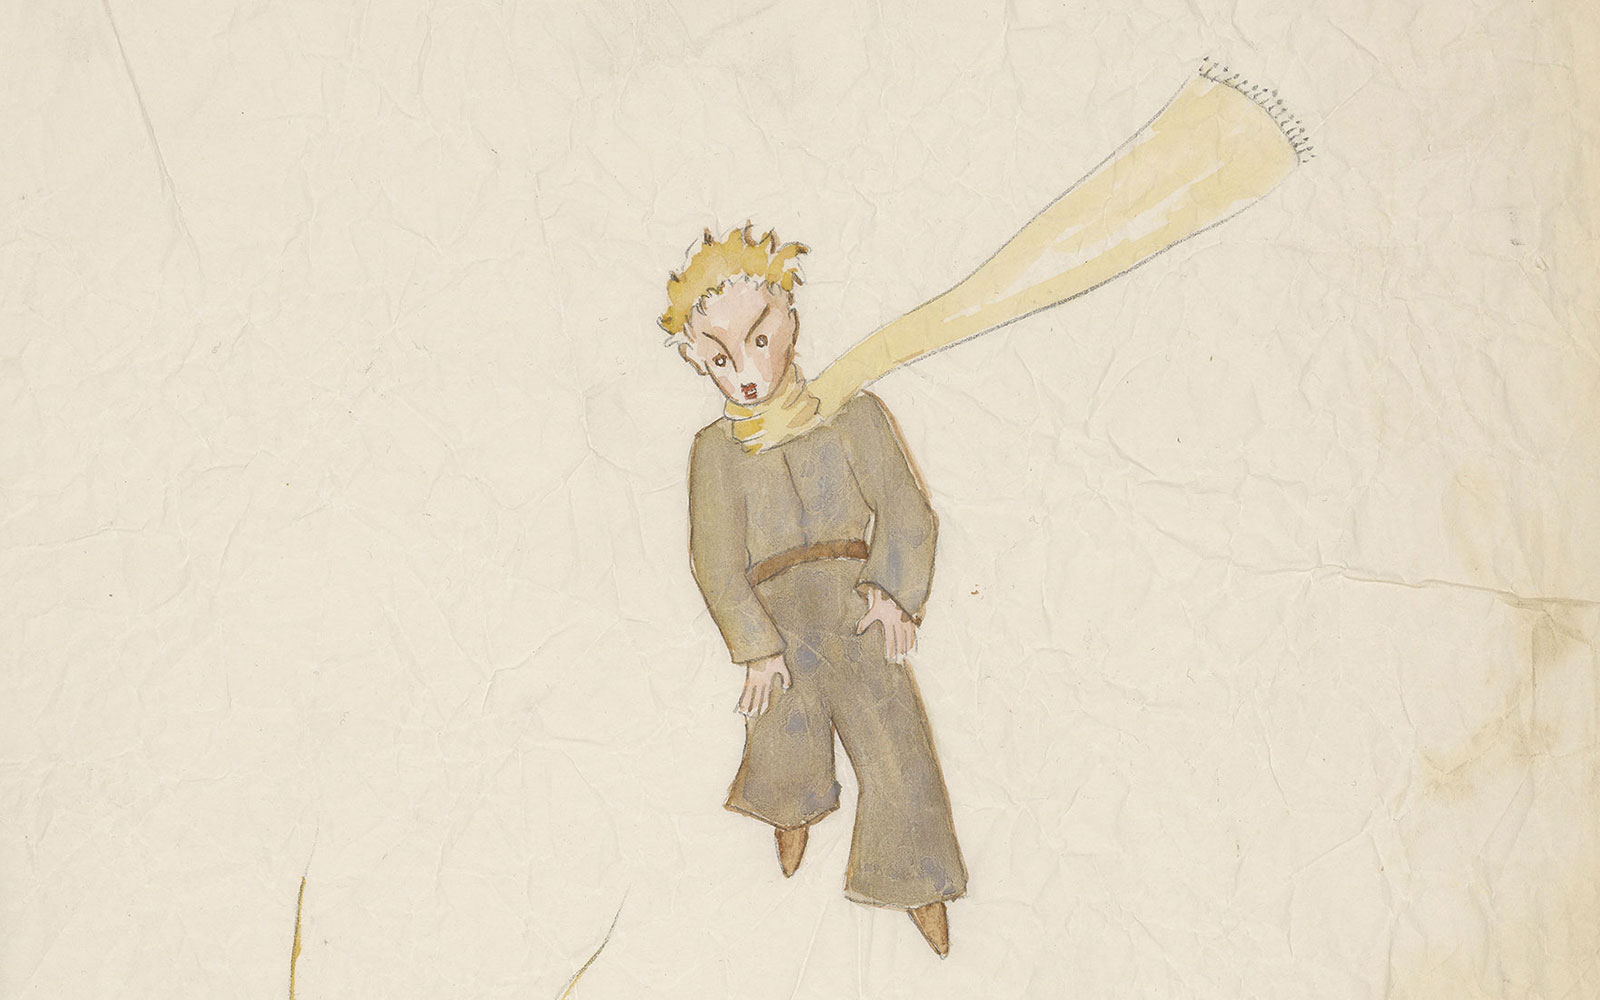 Drawing of a floating figure of a boy dressed in green with blonde hair and a yellow scarf blown up to the right.